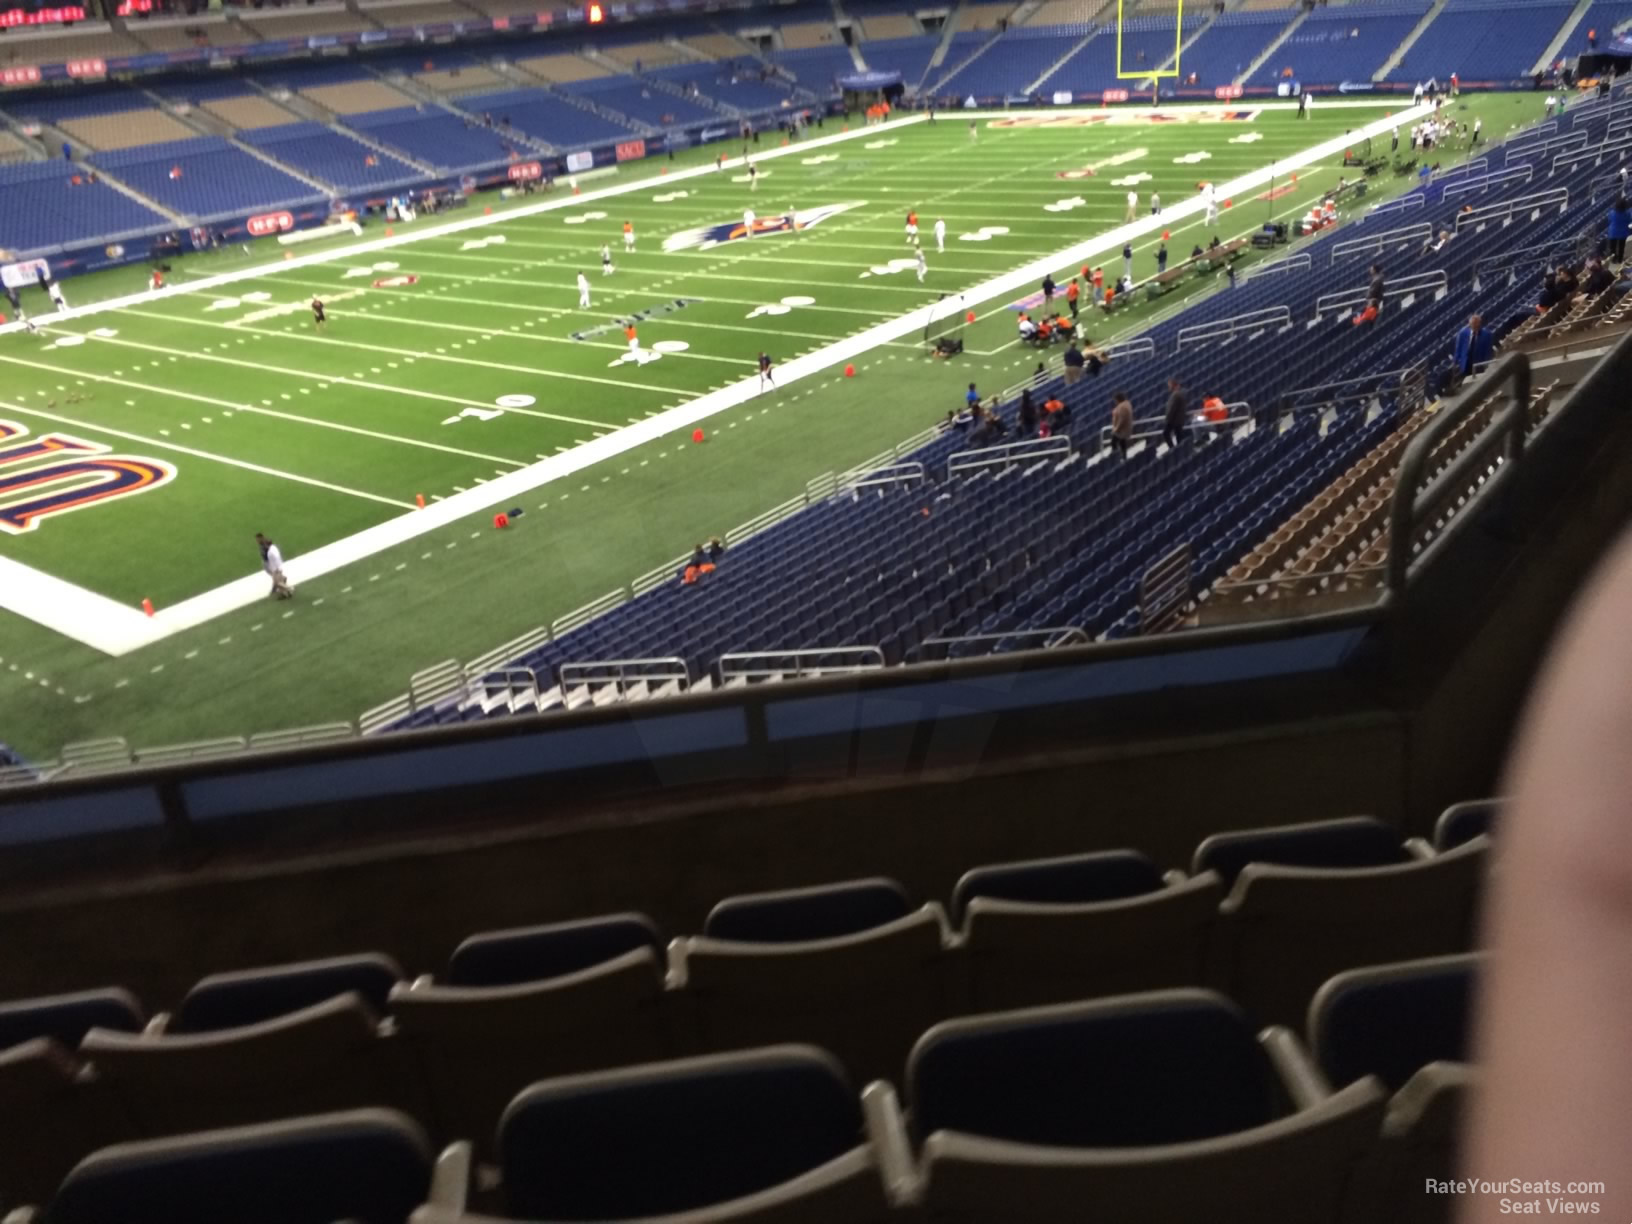 section 218, row 5 seat view  for football - alamodome